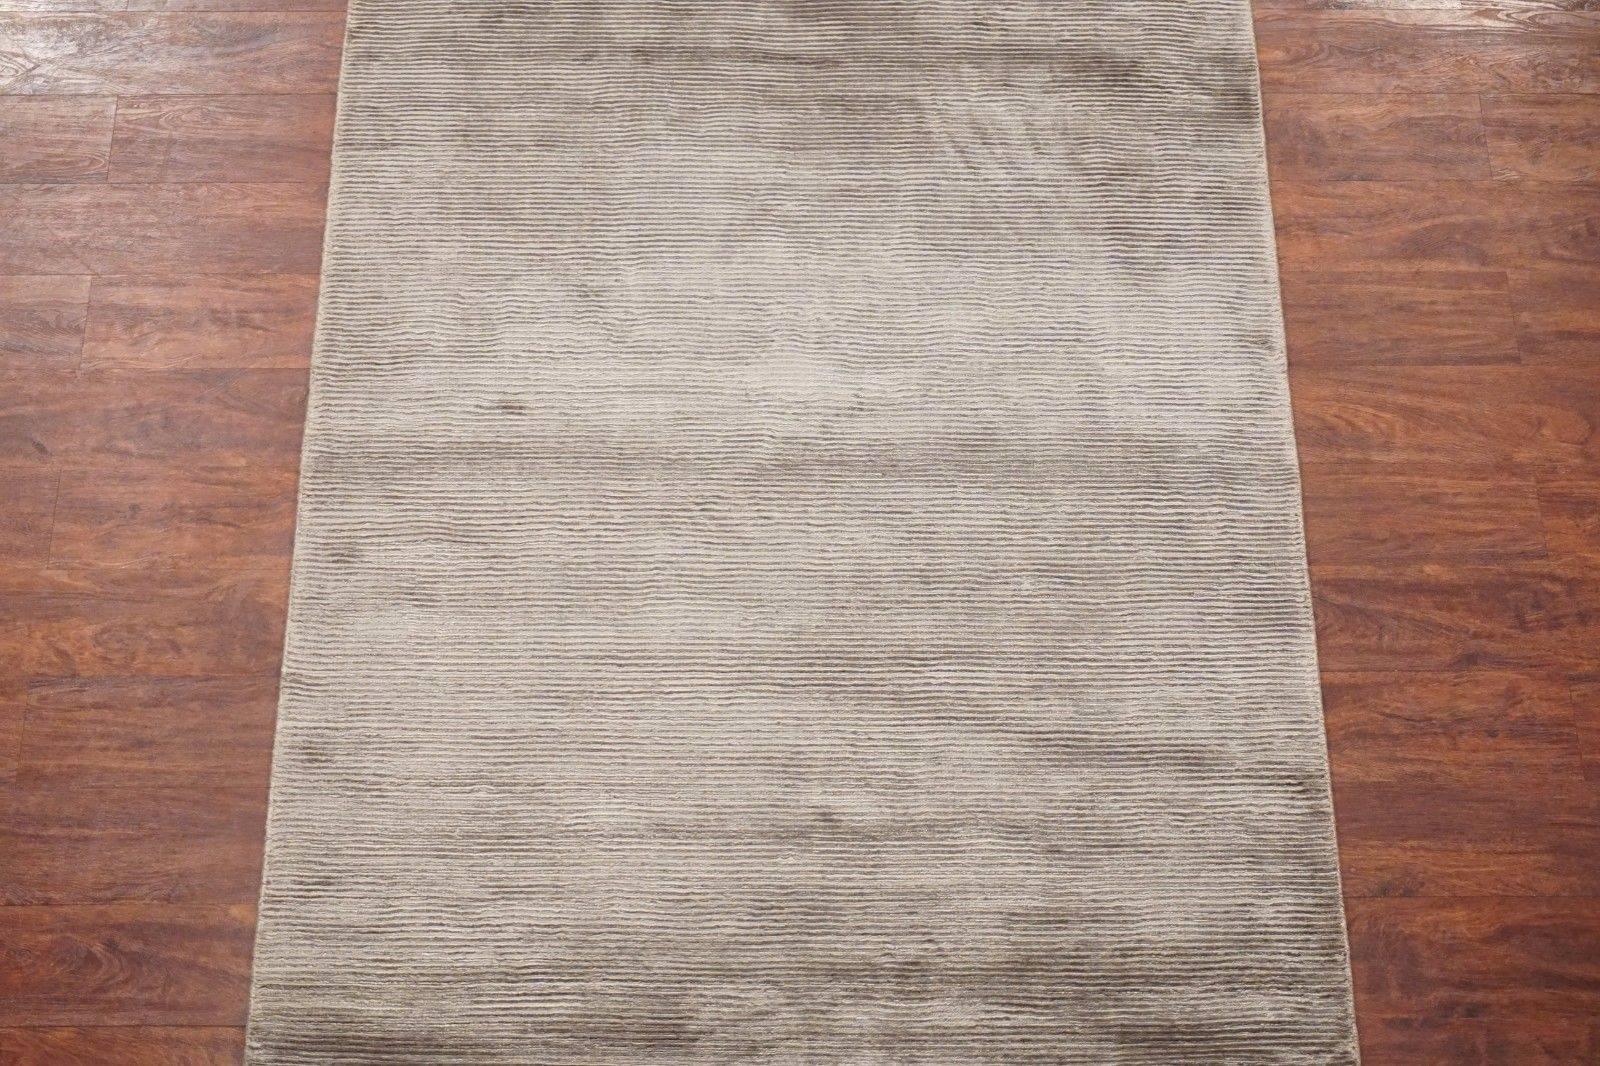 Solid bamboo silk area rug with striped design

2015

Measures: 4' x 6' 1